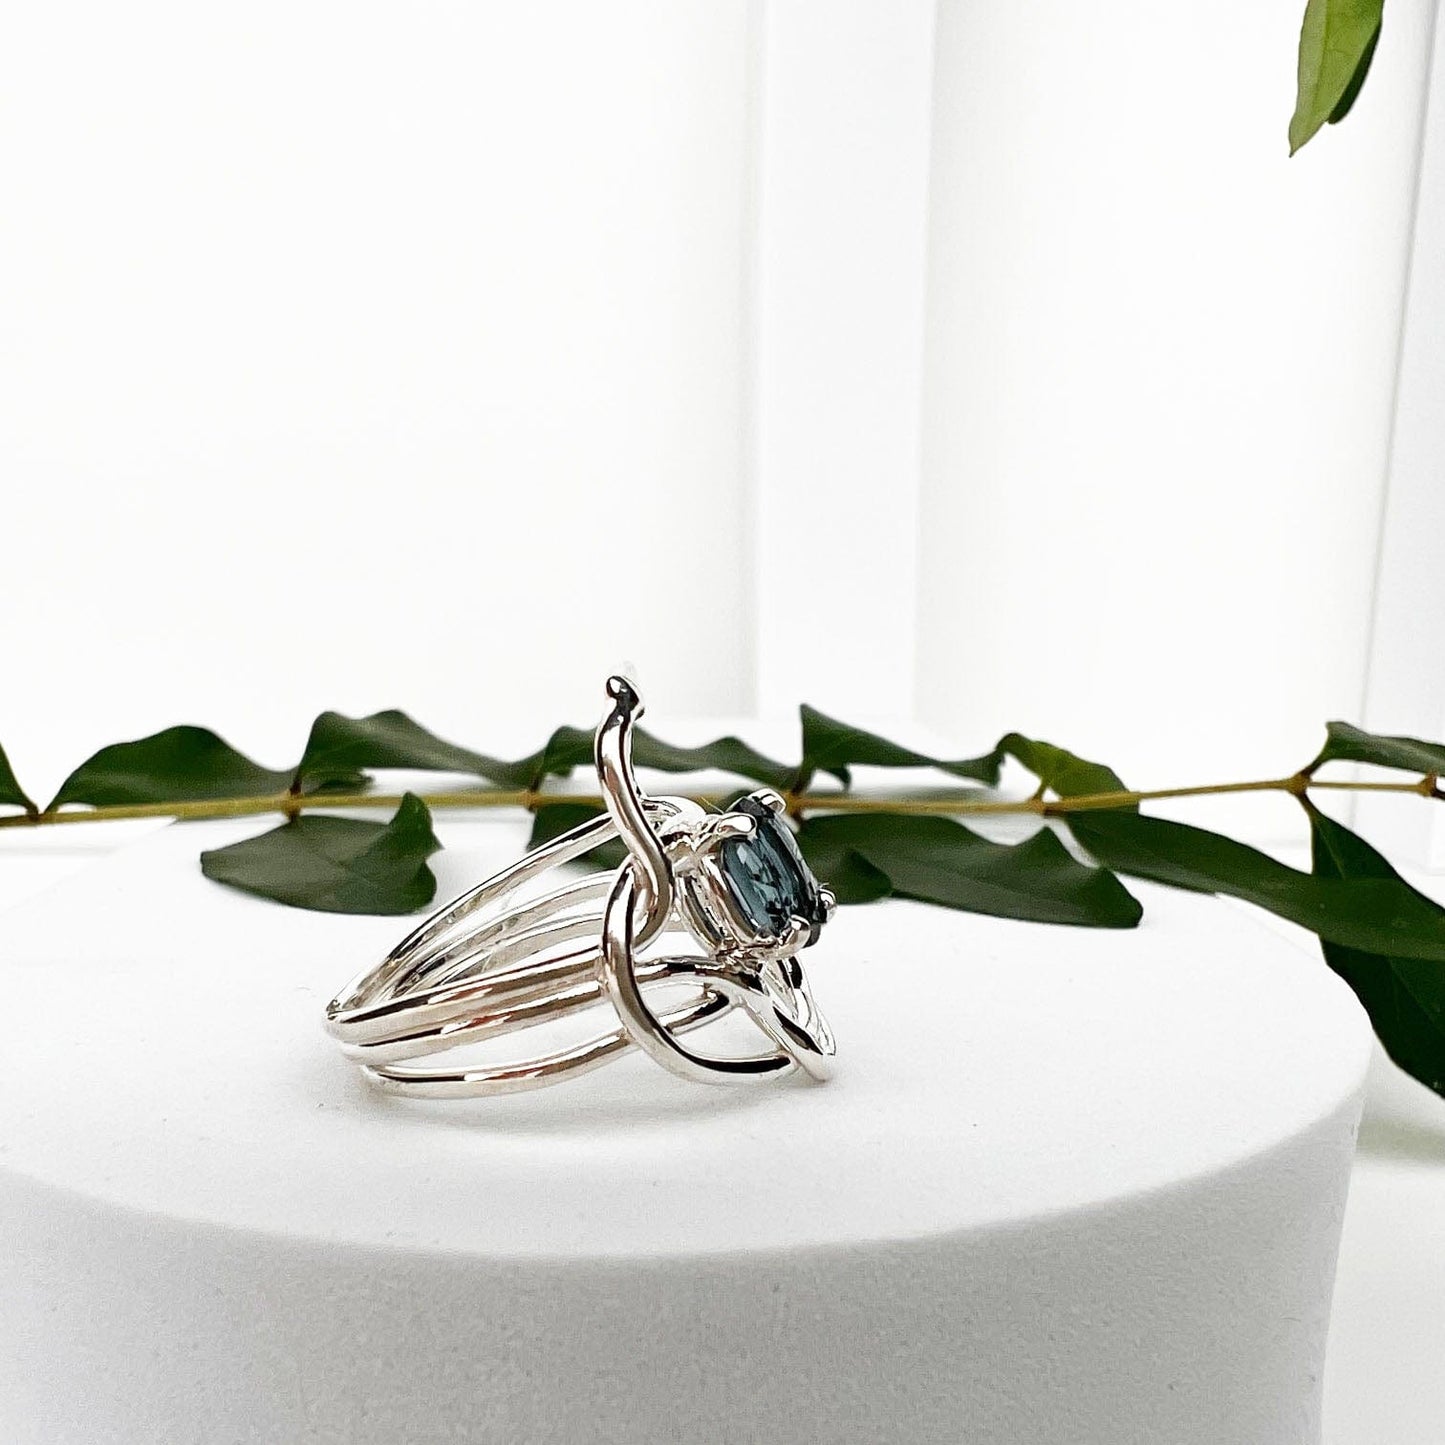 Silver London Blue Topaz Entwined Ring